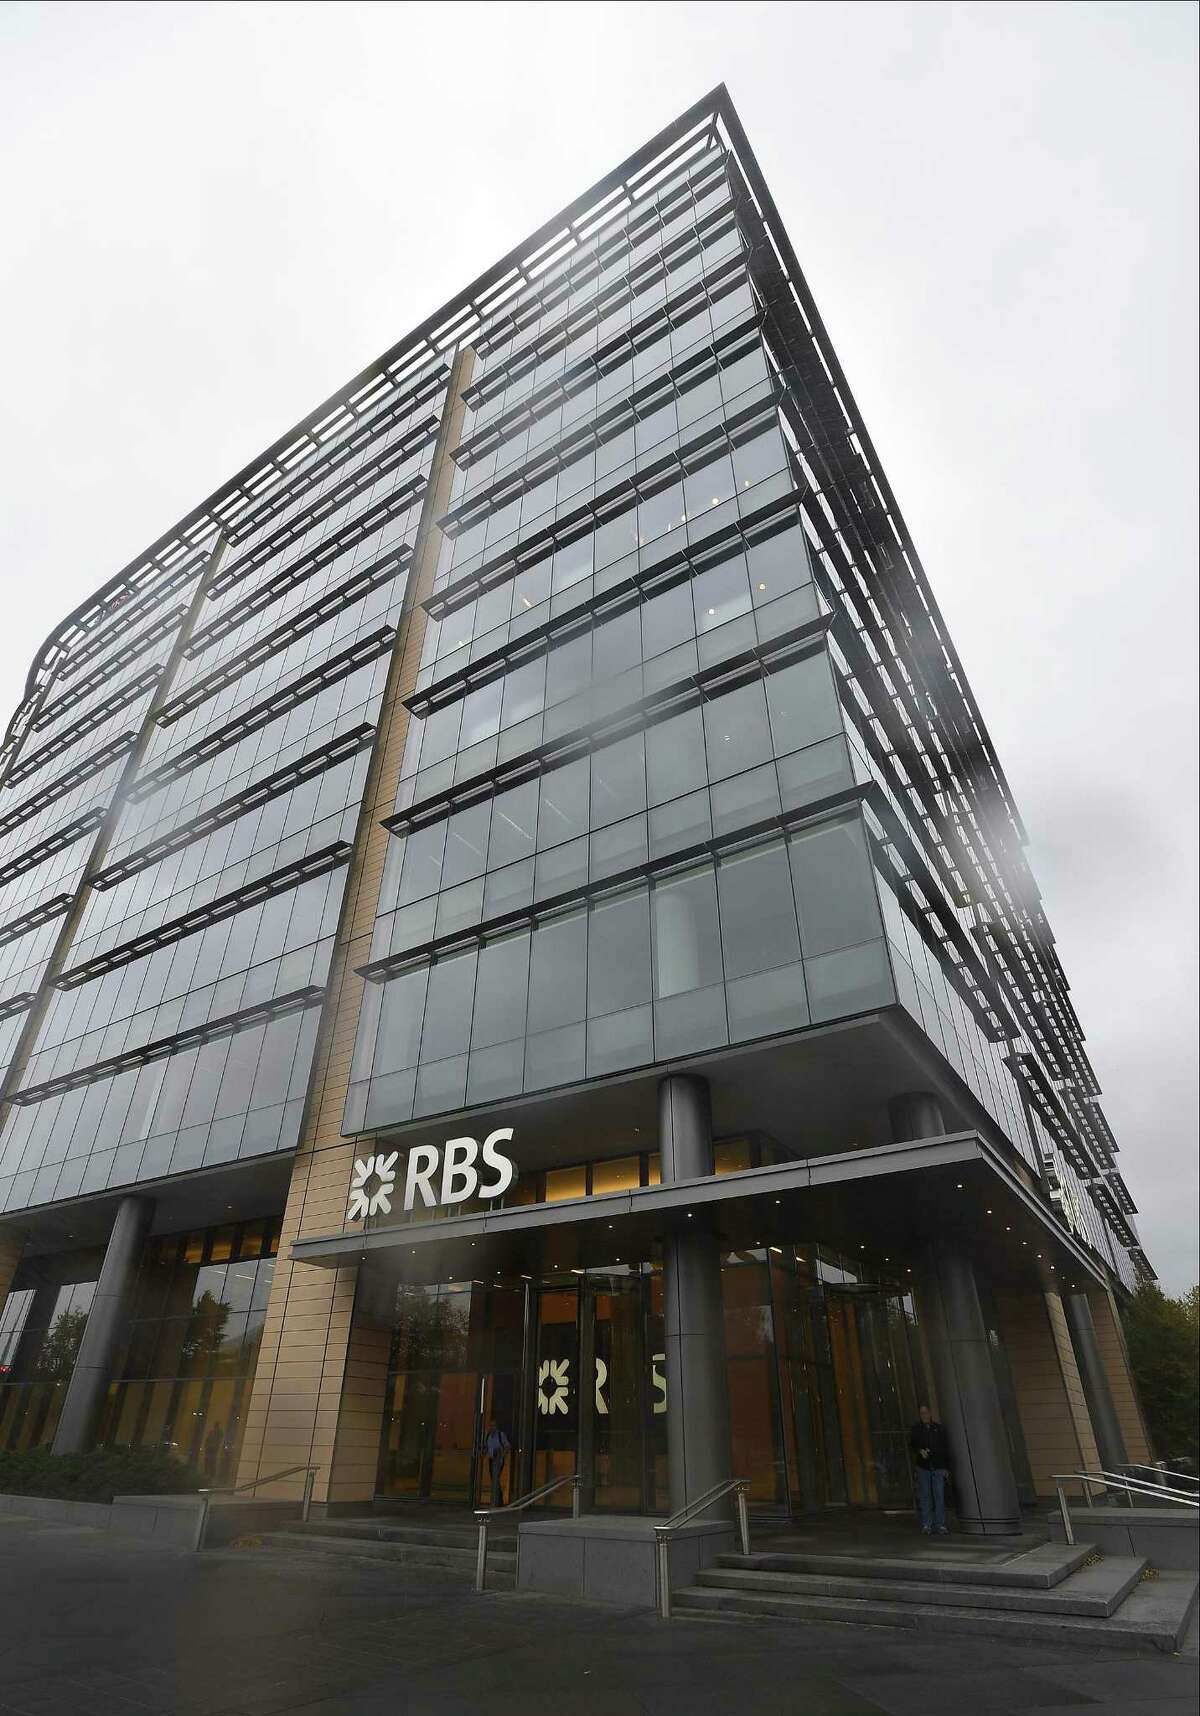 Royal Bank of Scotland’s Americas headquarters are located at 600 Washington Blvd., in downtown Stamford, Conn.